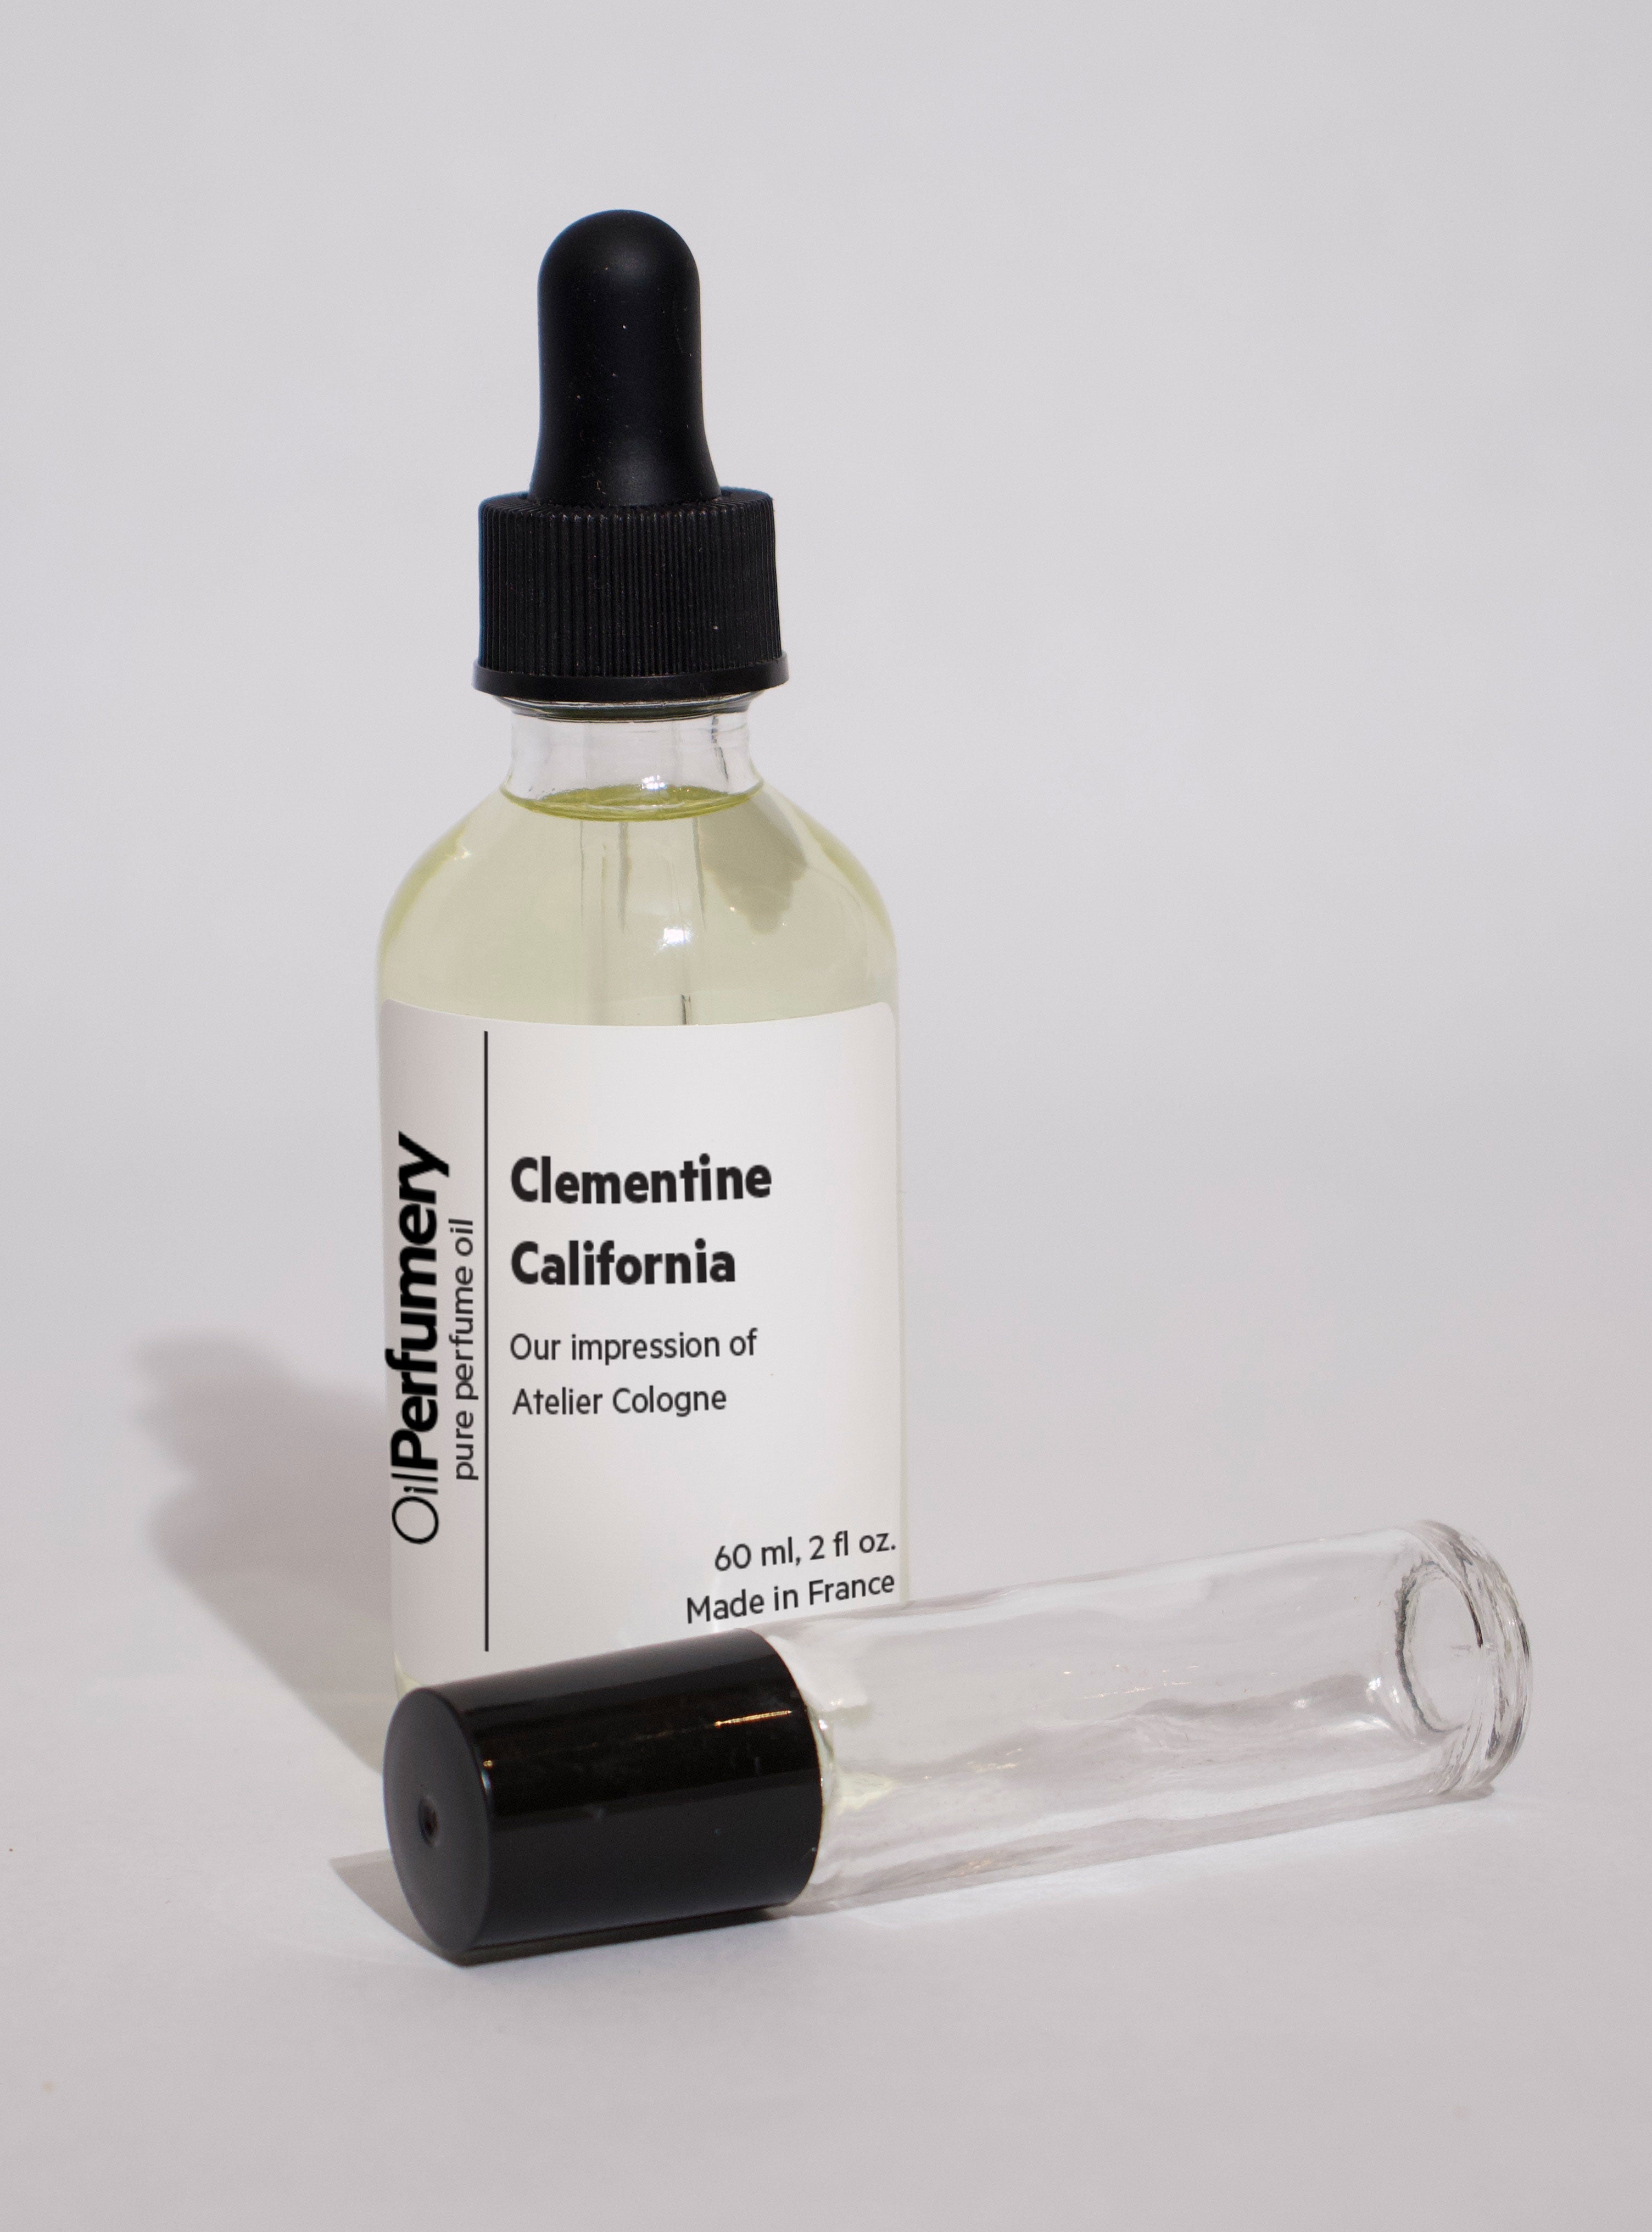 Oil Perfumery Impression of Atelier Cologne - Clementine California